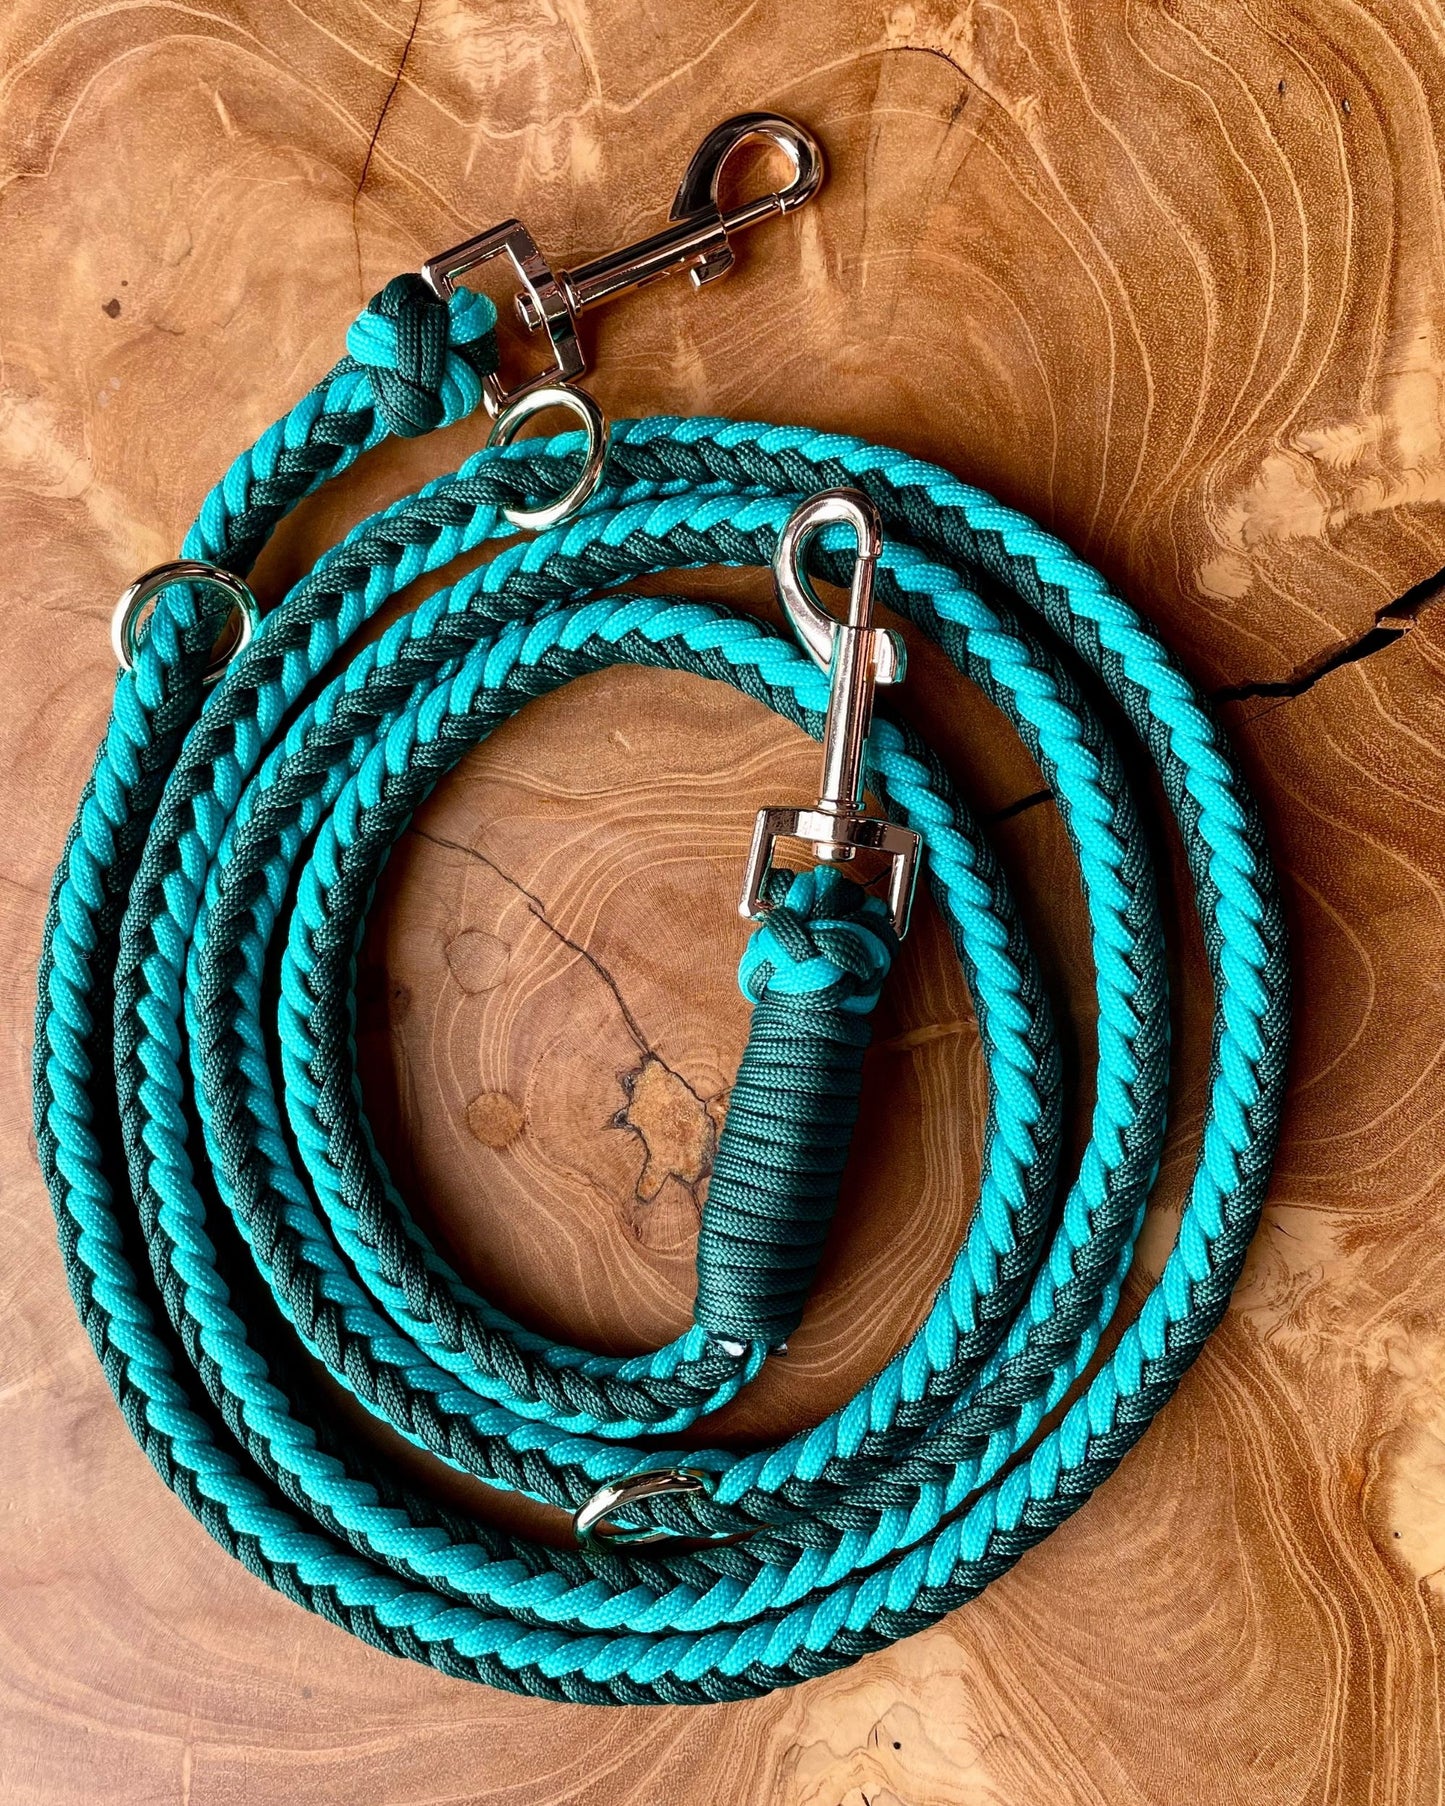 Beautiful 7-in-1 teal and green Paracord Multi-Leash